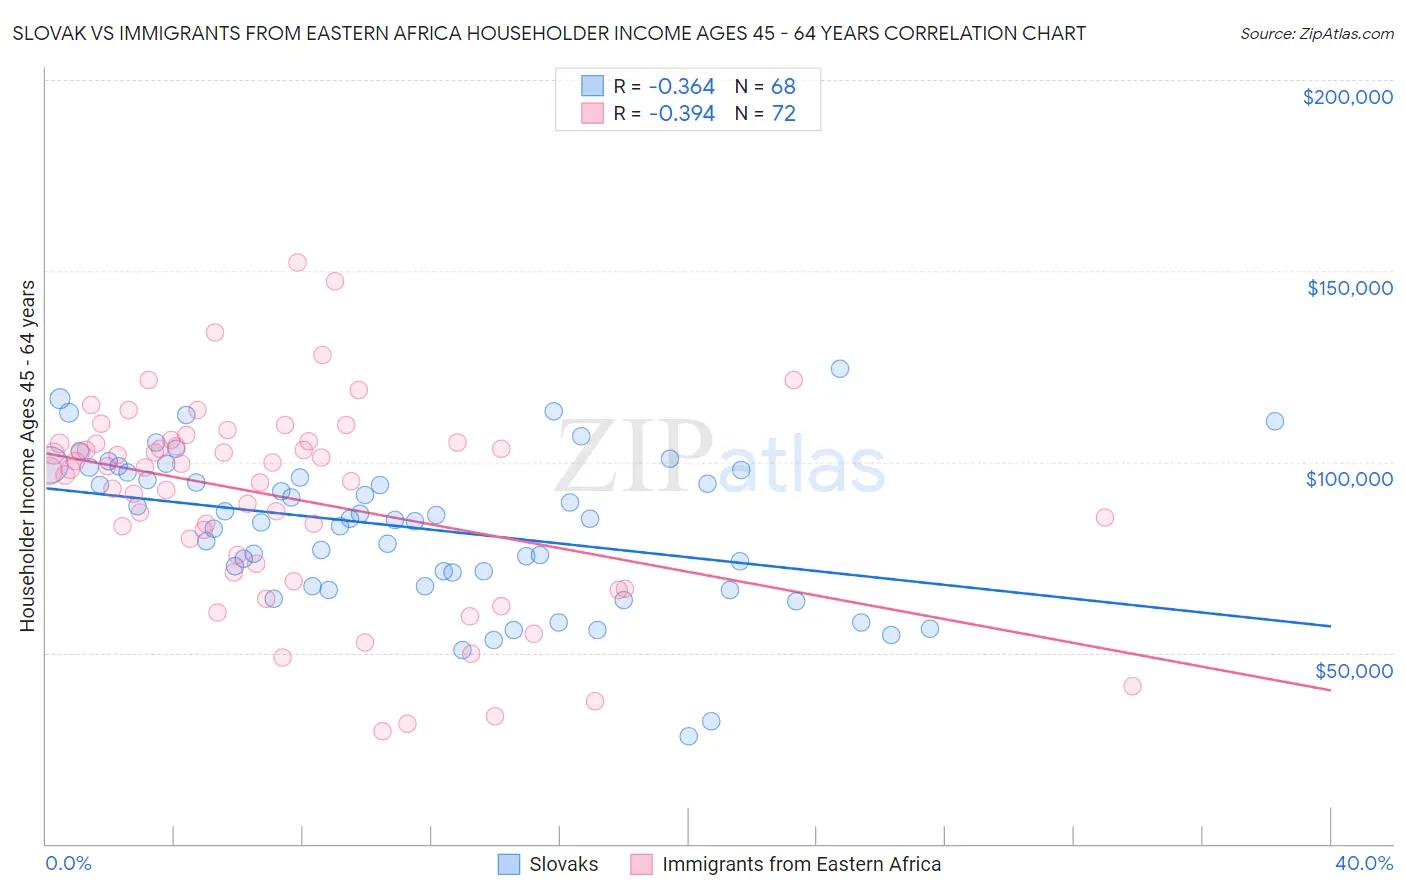 Slovak vs Immigrants from Eastern Africa Householder Income Ages 45 - 64 years